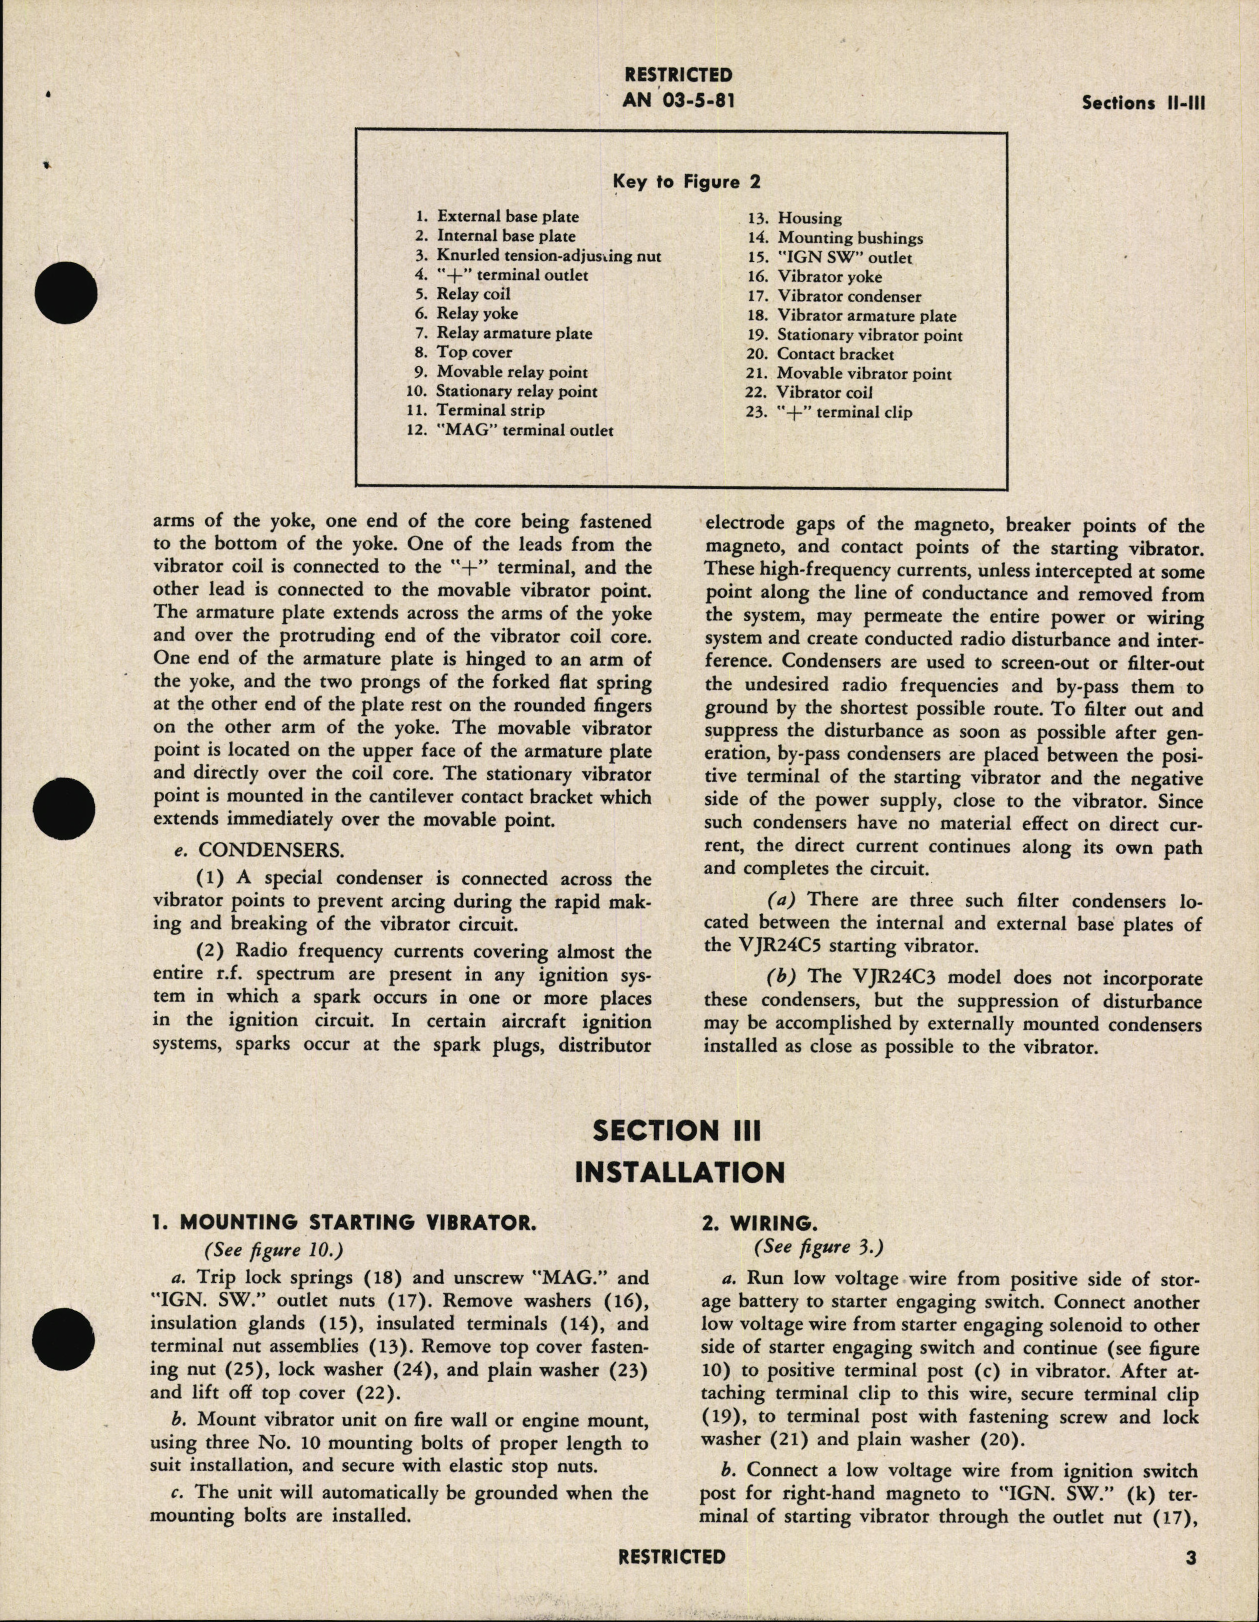 Sample page 7 from AirCorps Library document: Handbook of Instructions with Parts Catalog for Starting Vibrators VJR4C3 and VJR24C5